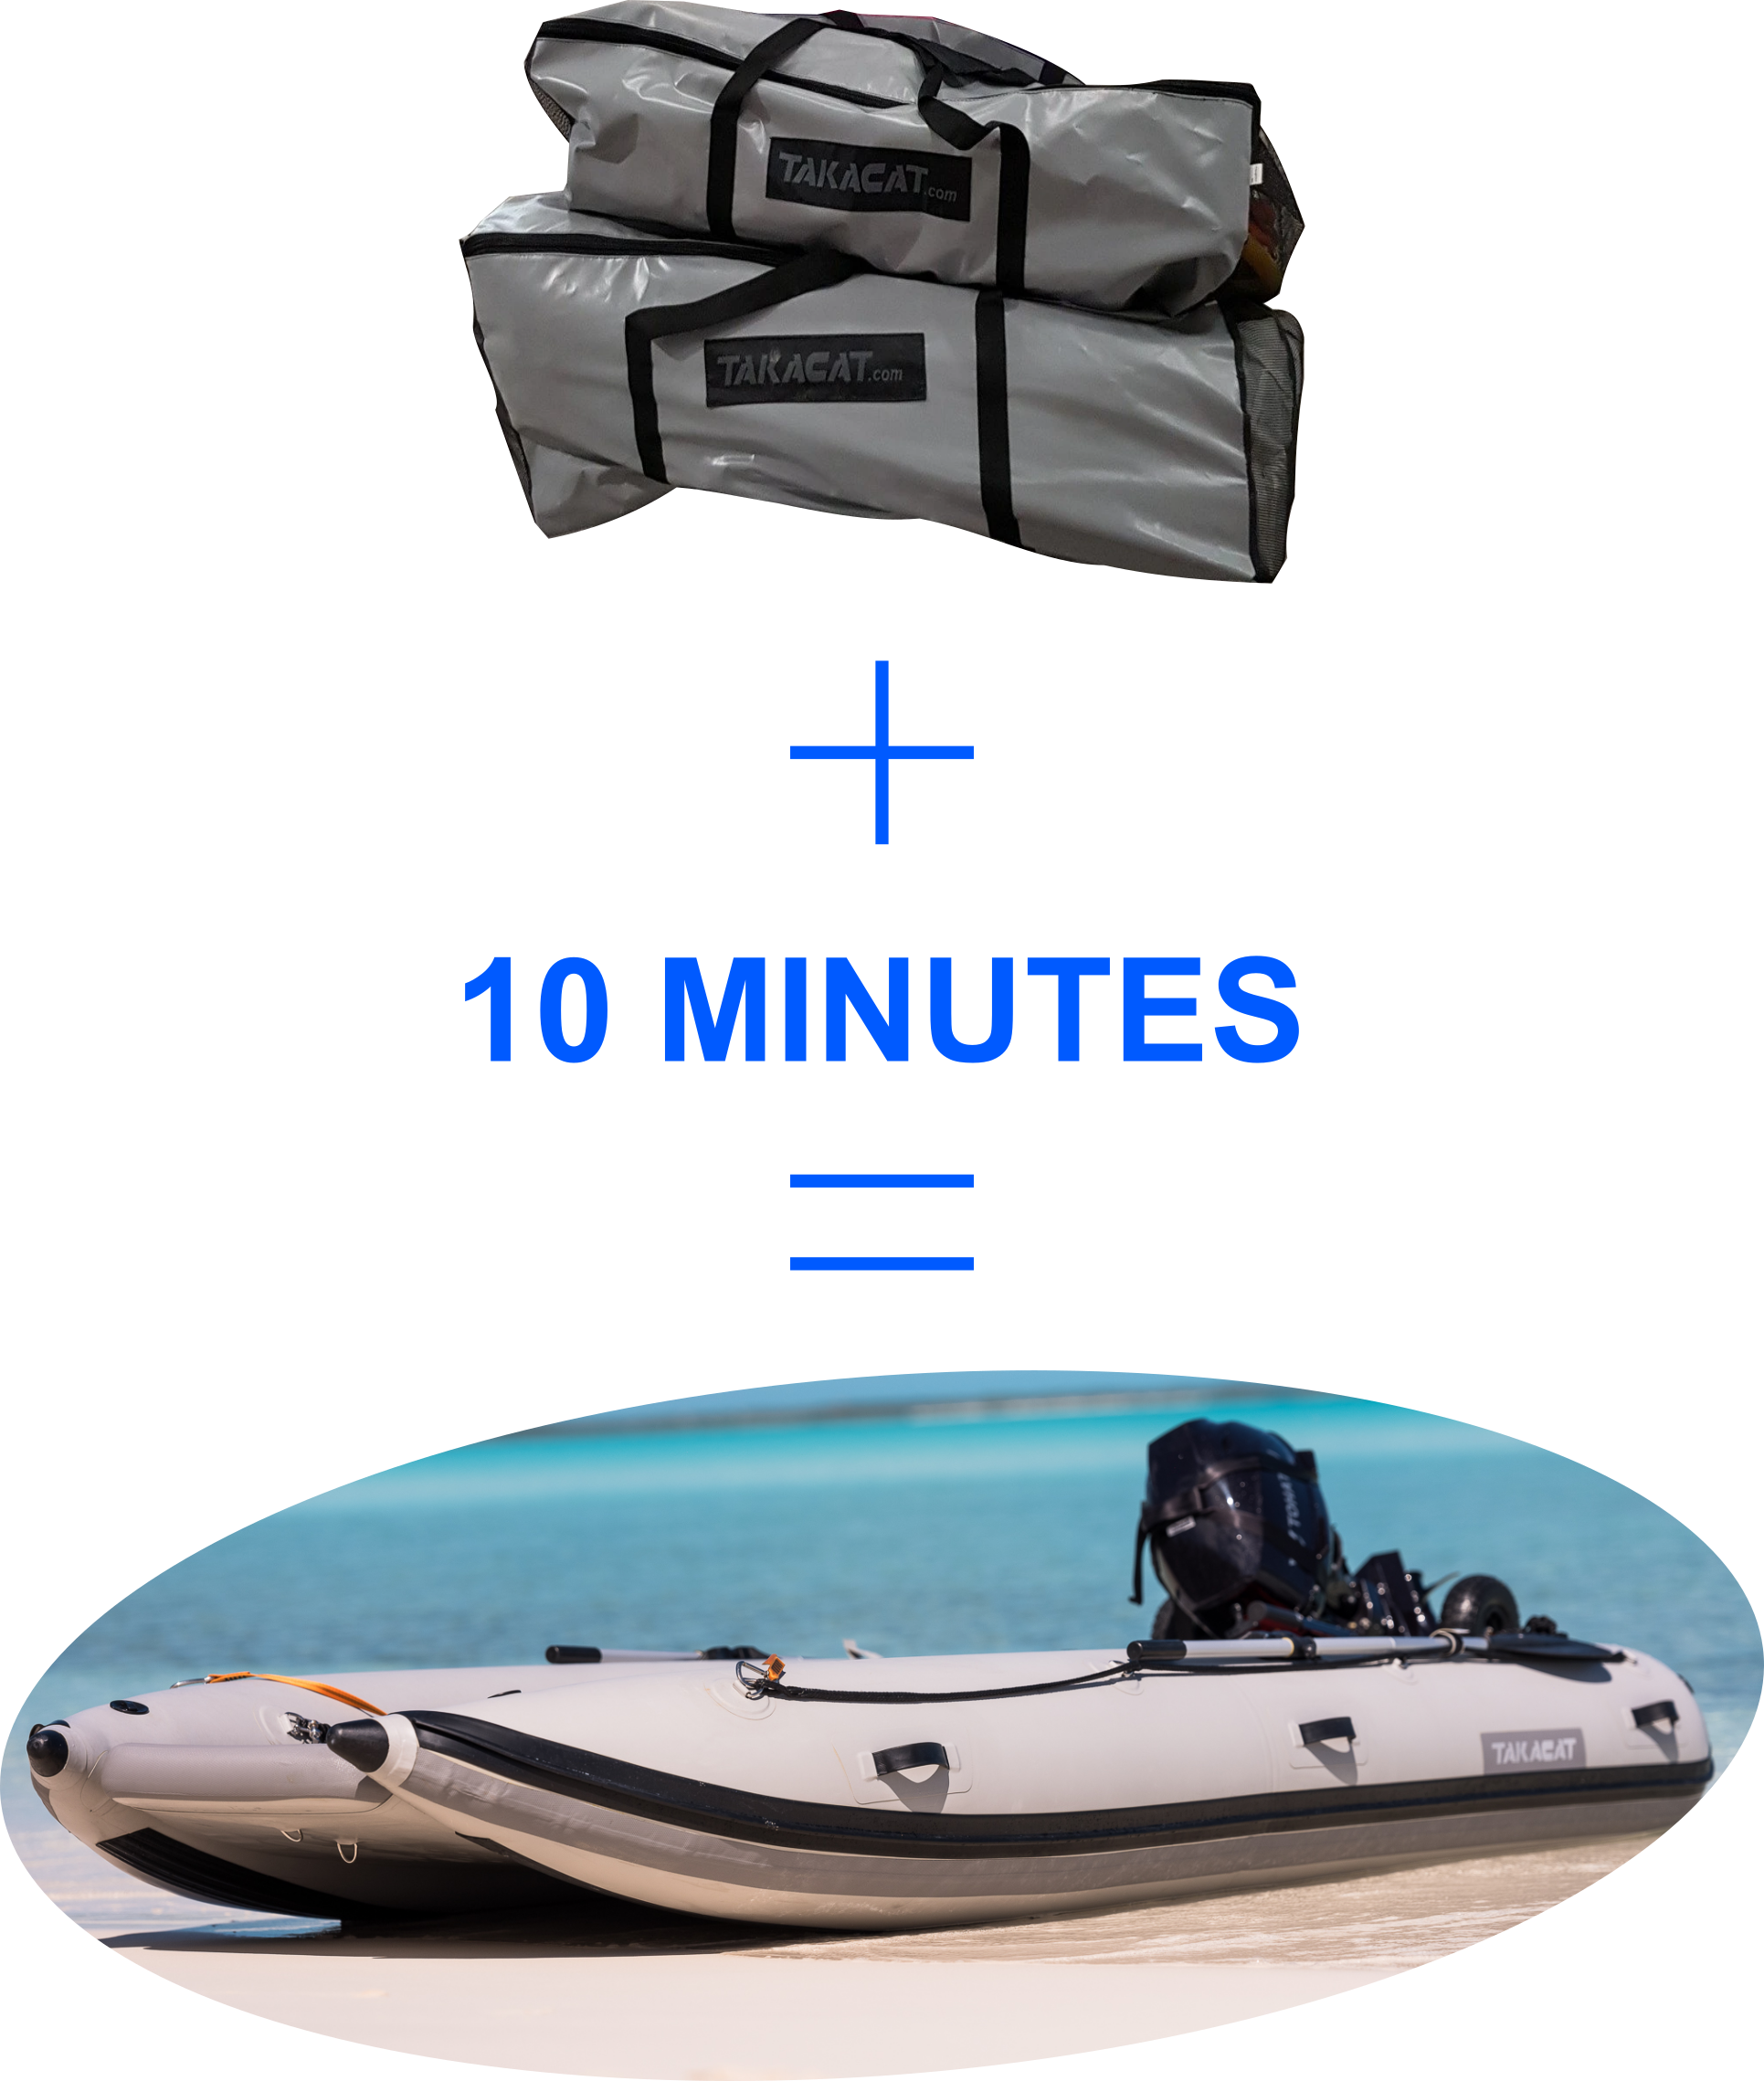 Shop the Takacat T340 LX  Buy the Ultimate Portable Dinghy